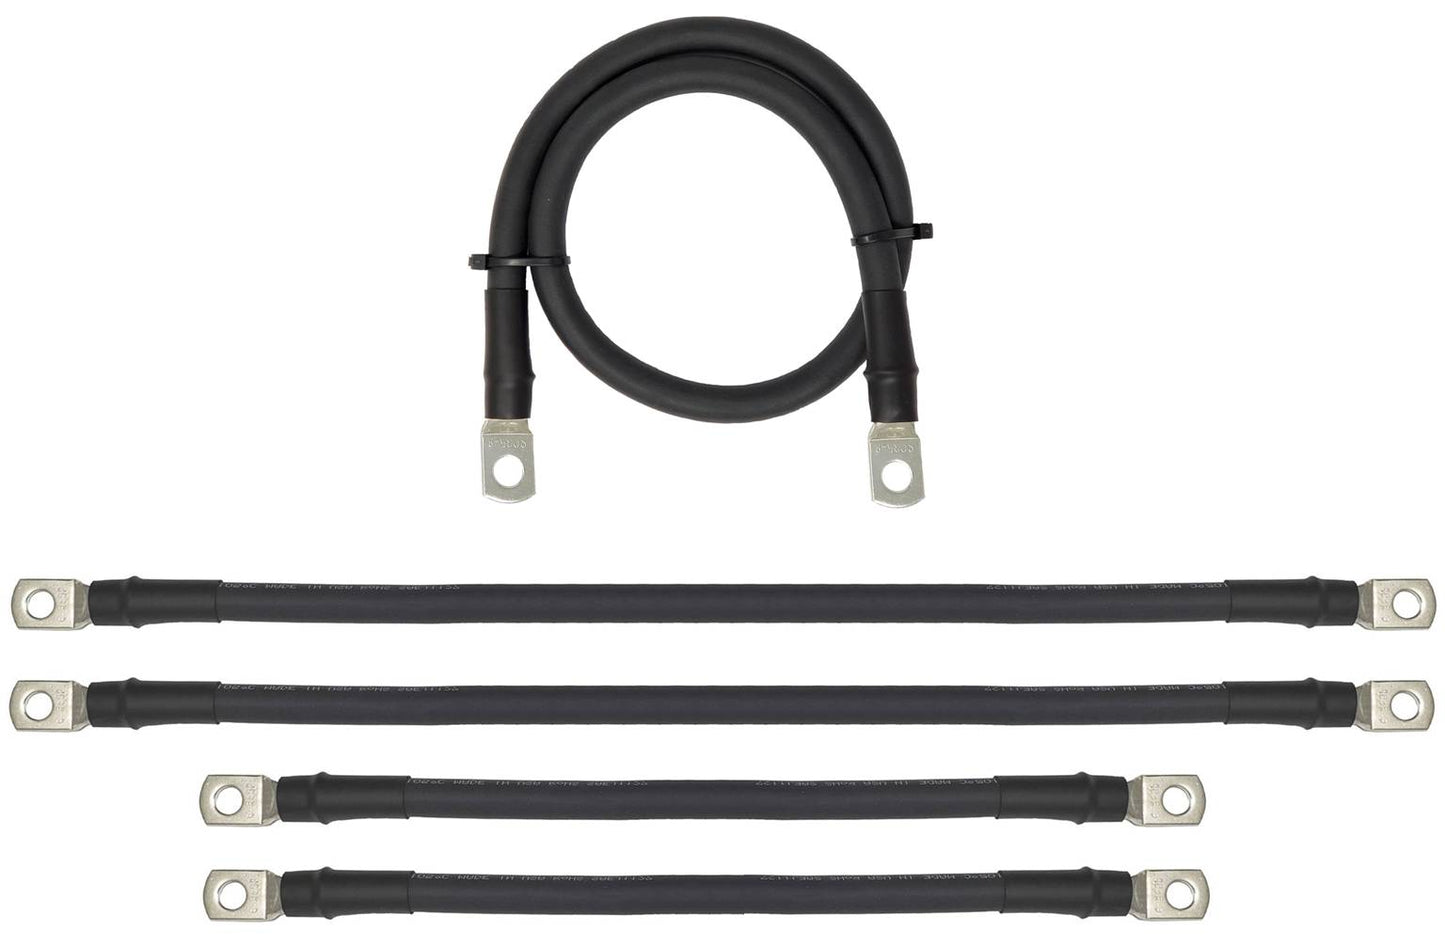 Aftermarket EZGO TXT, PDS, RXV, Medalist Golf Cart Battery Cable Kits